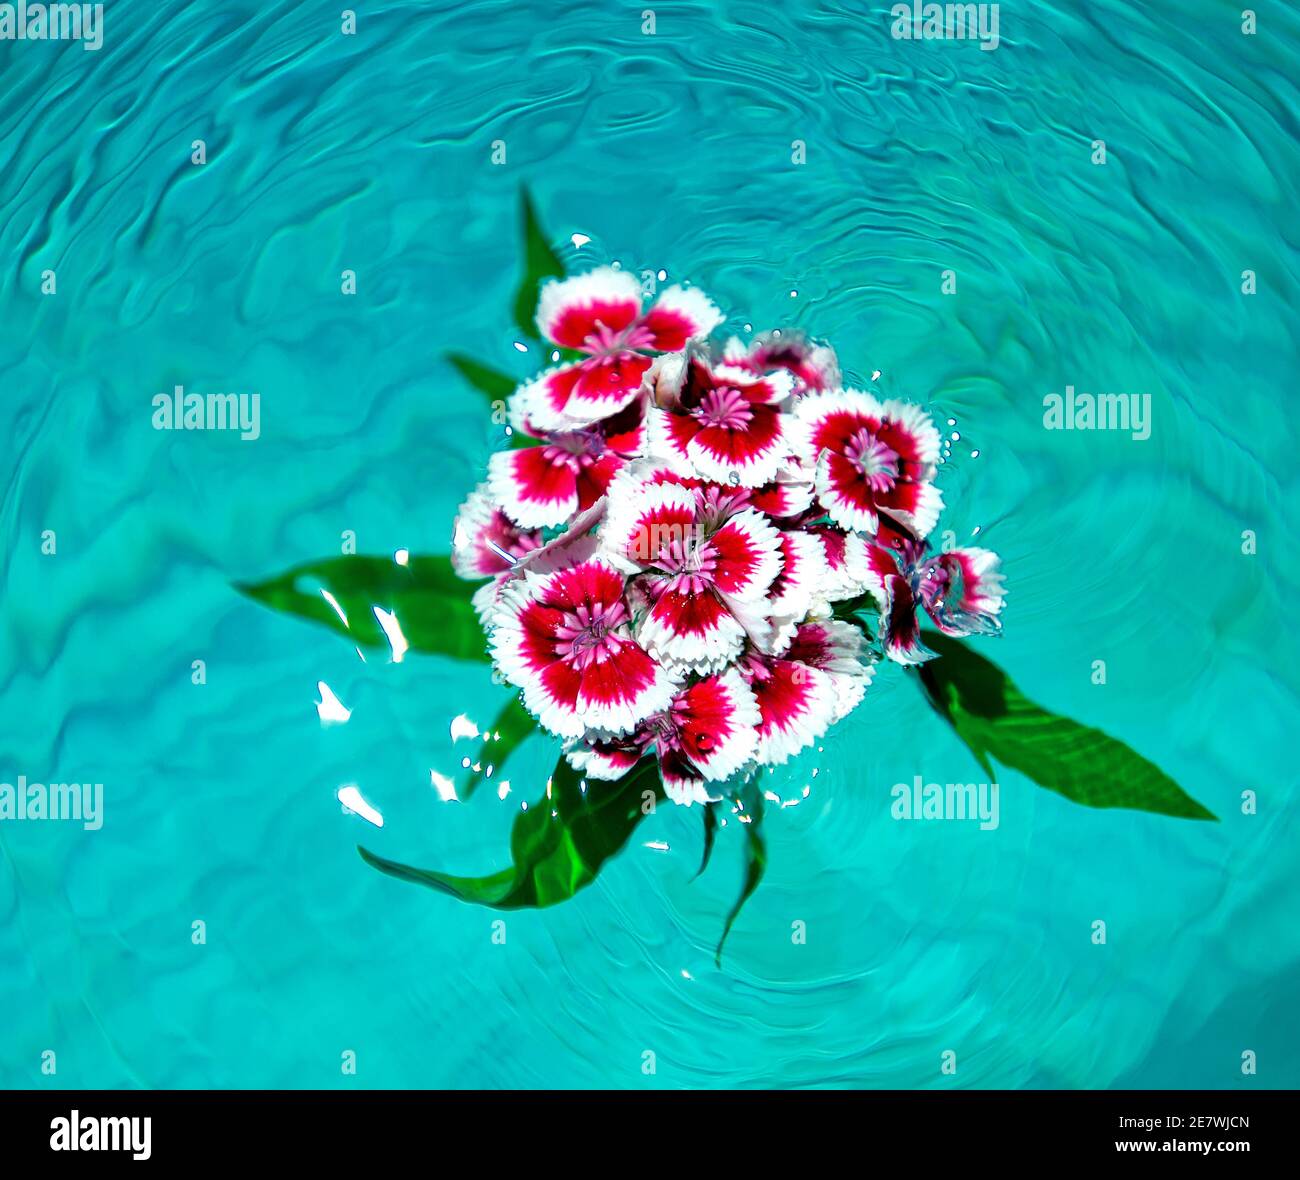 Flowers floating on water surface Stock Photo